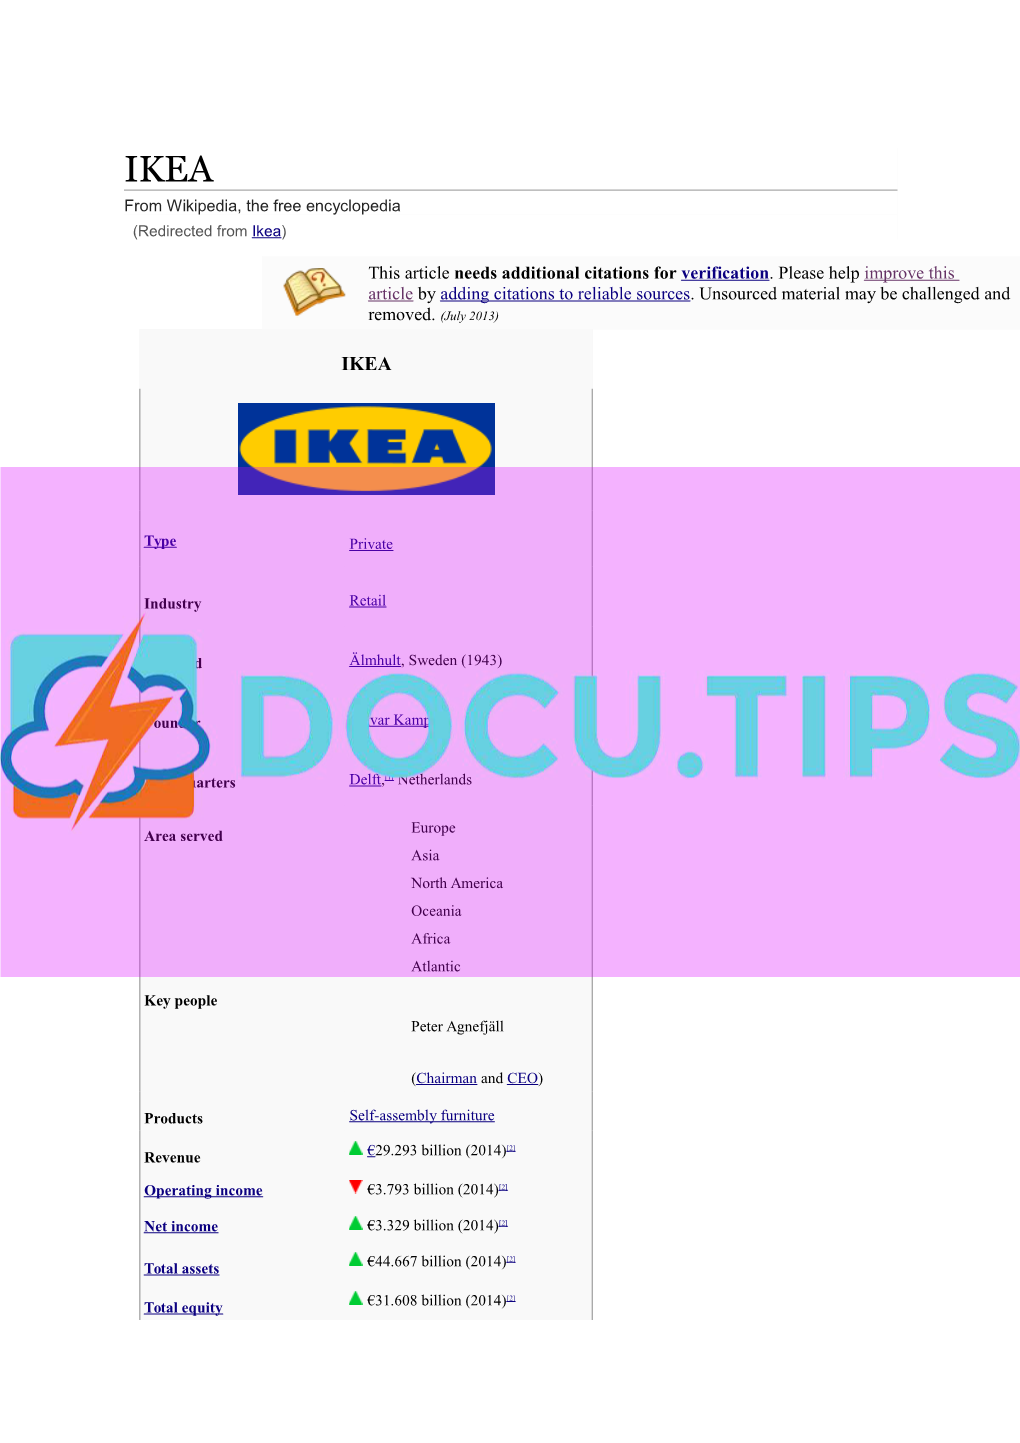 IKEA from Wikipedia, the Free Encyclopedia (Redirected from Ikea)